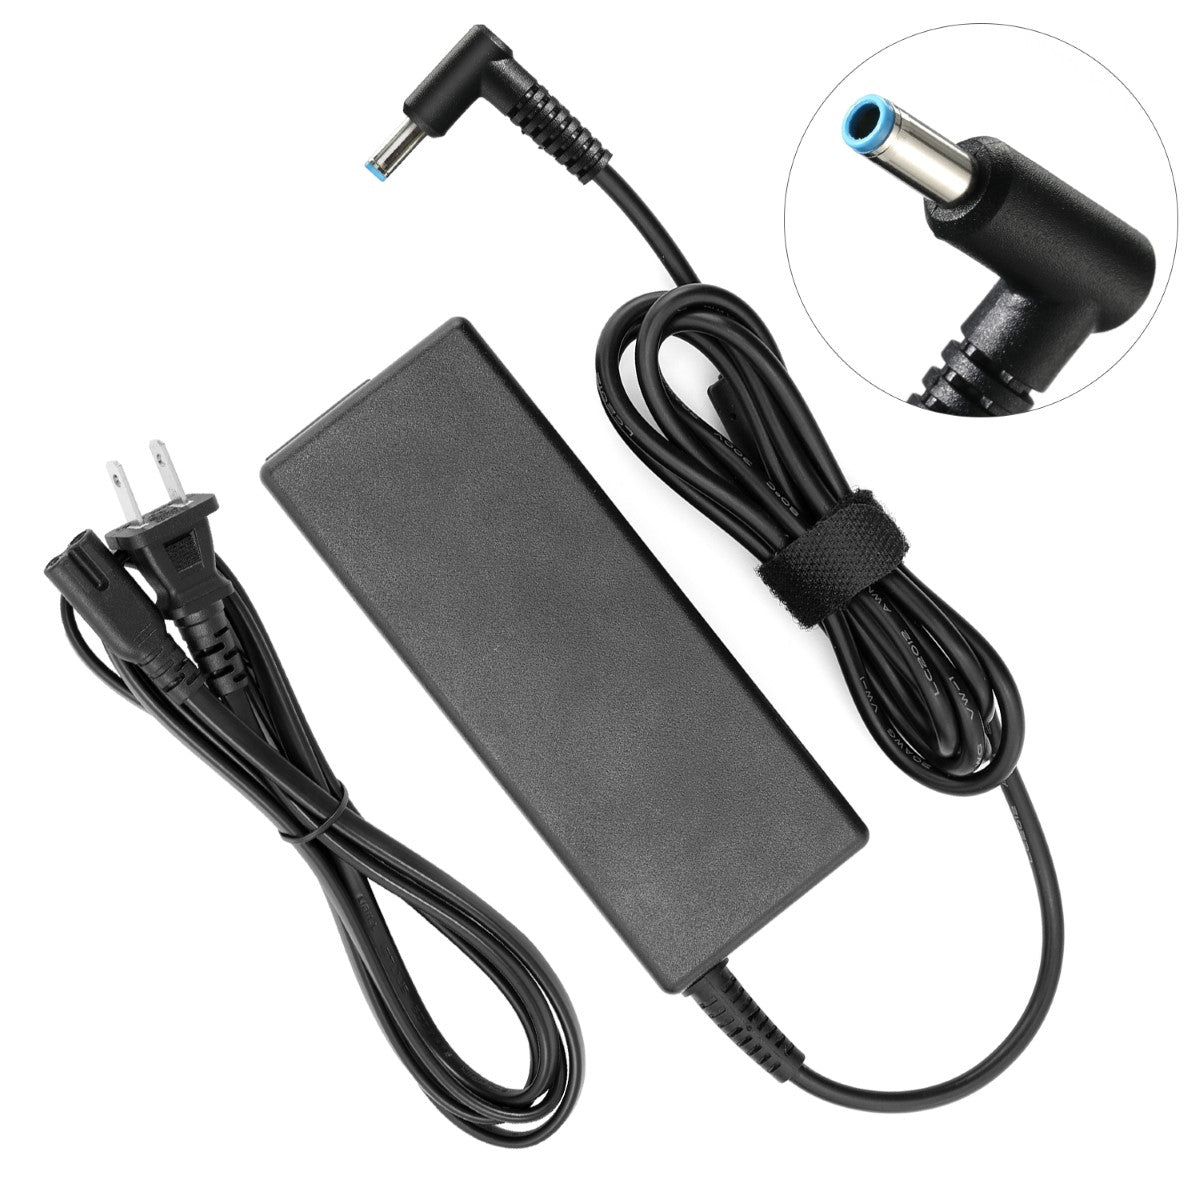 AC Adapter Charger for HP Envy Touchsmart 15-j092nr Notebook.